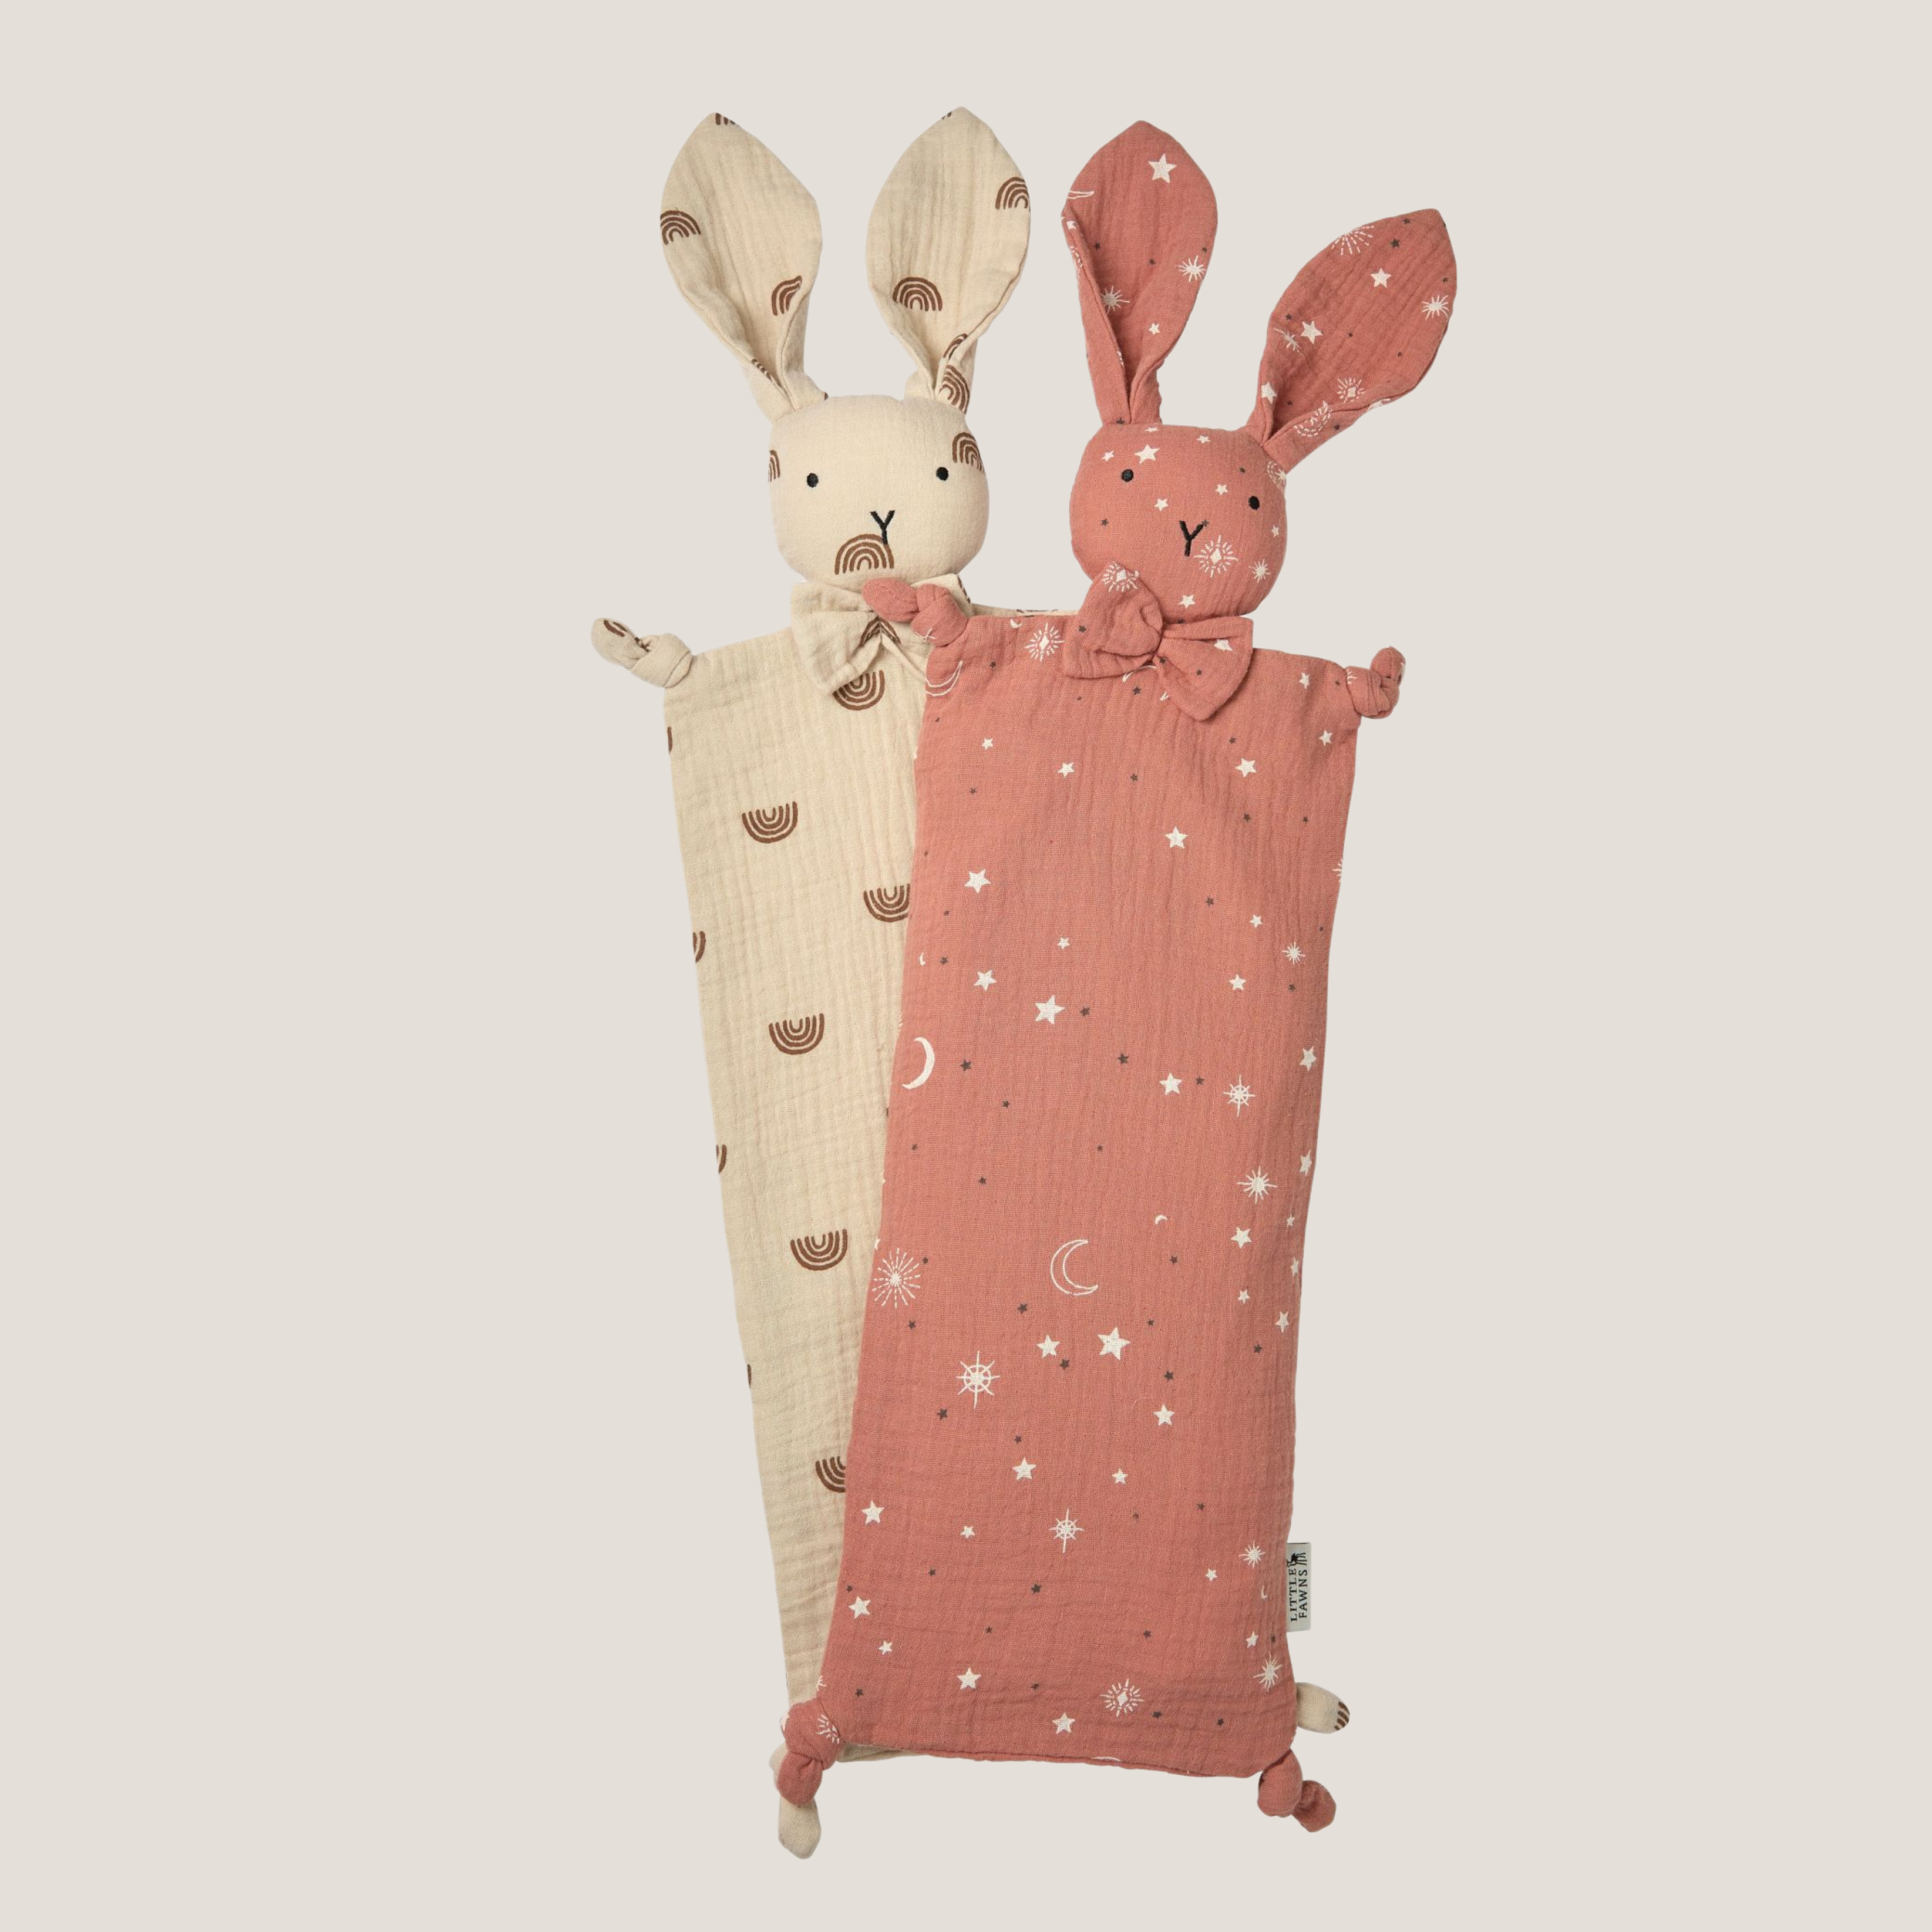 Snuggly Bunny Beansprout Husk Pillow + Cover Bundle (Dusty Pink & Ivory Beige Rainbow)